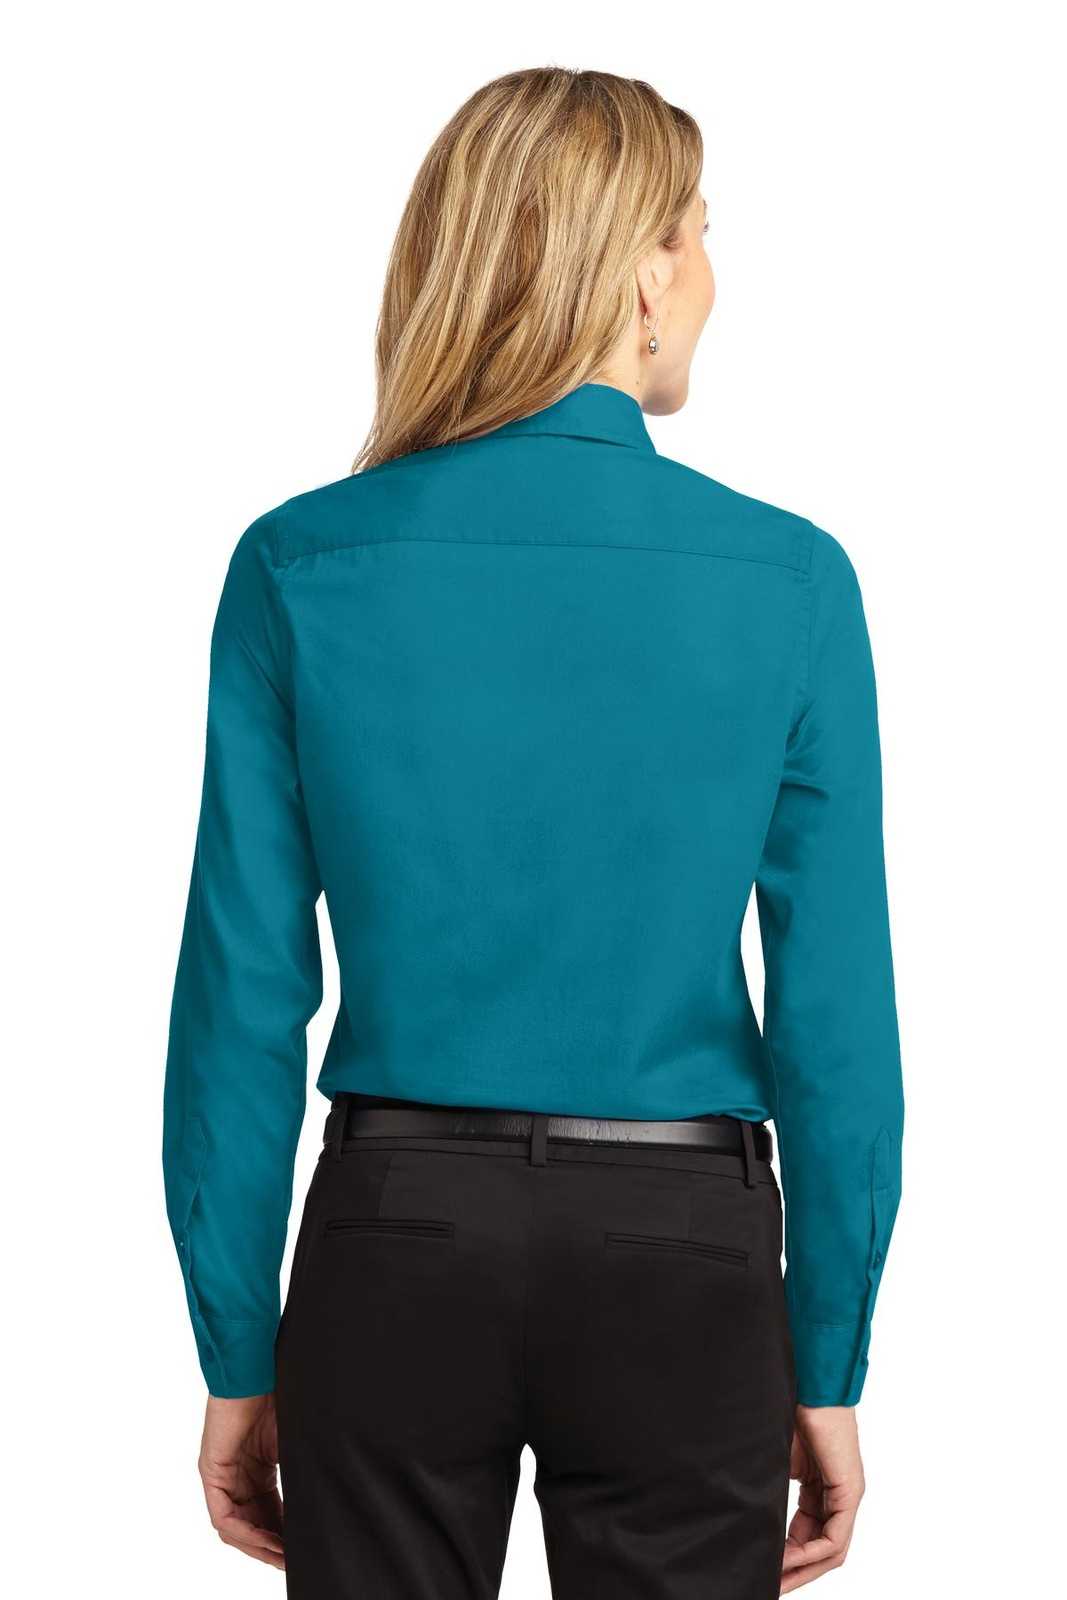 Port Authority L608 Ladies Long Sleeve Easy Care Shirt - Teal Green - HIT a Double - 1